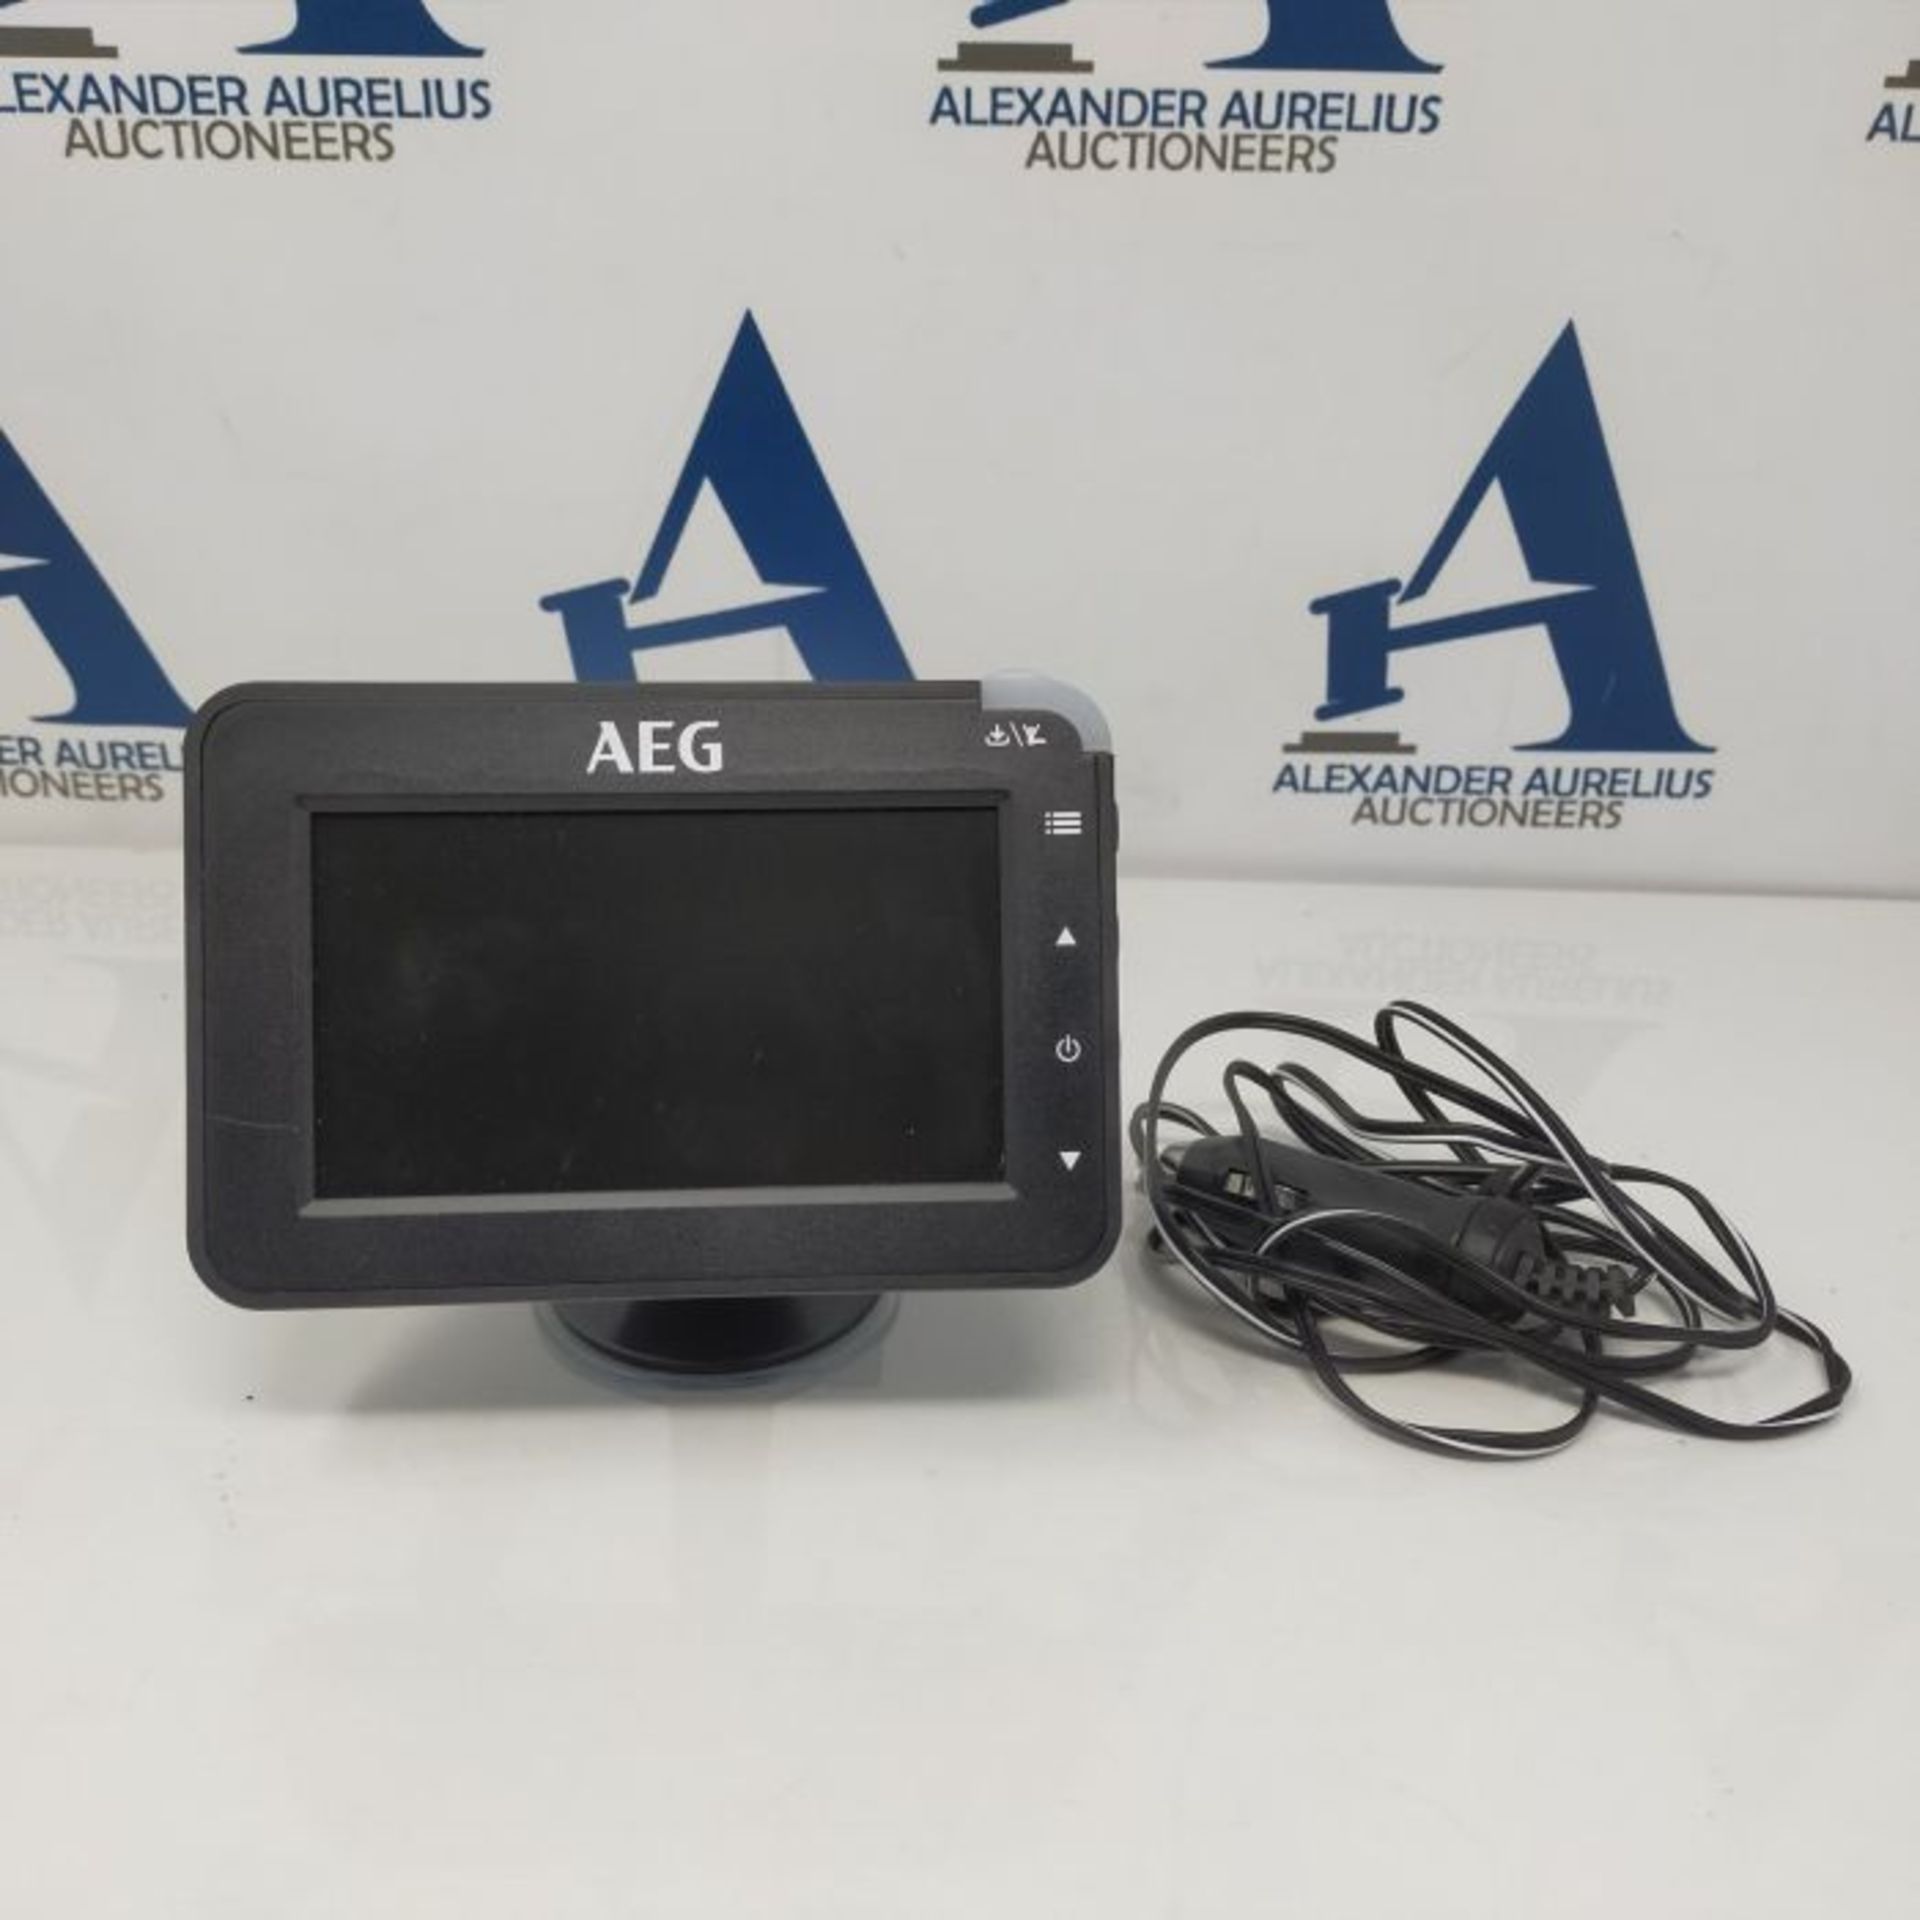 RRP £99.00 [INCOMPLETE] AEG Solar Powered Wireless Digital Reversing Camera, Parking Aid, with Ra - Image 2 of 2